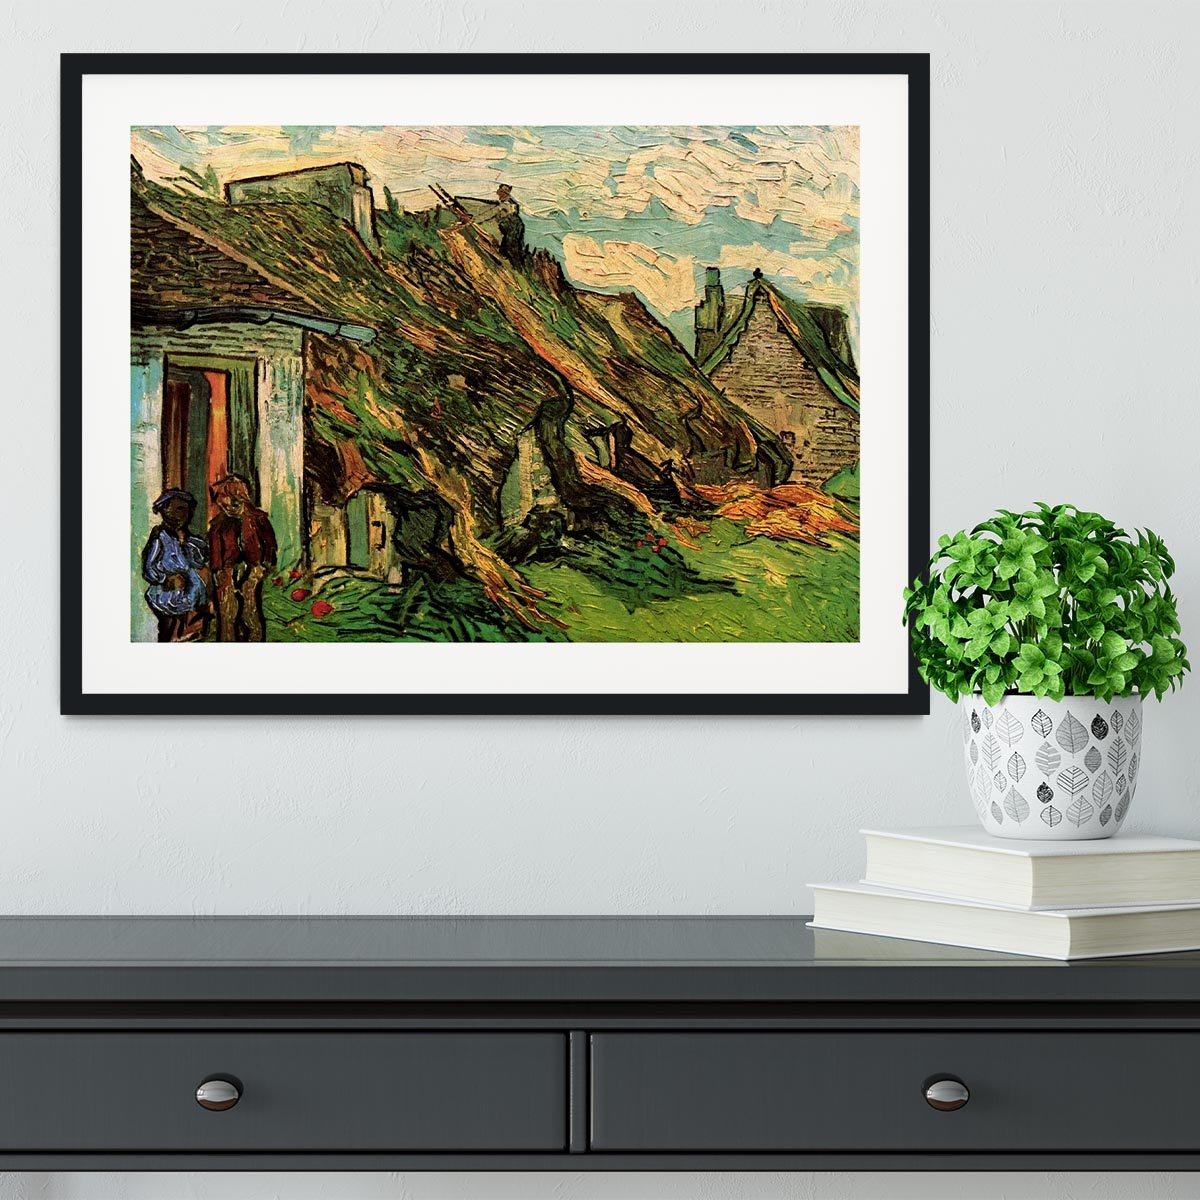 Thatched Sandstone Cottages in Chaponval by Van Gogh Framed Print - Canvas Art Rocks - 1